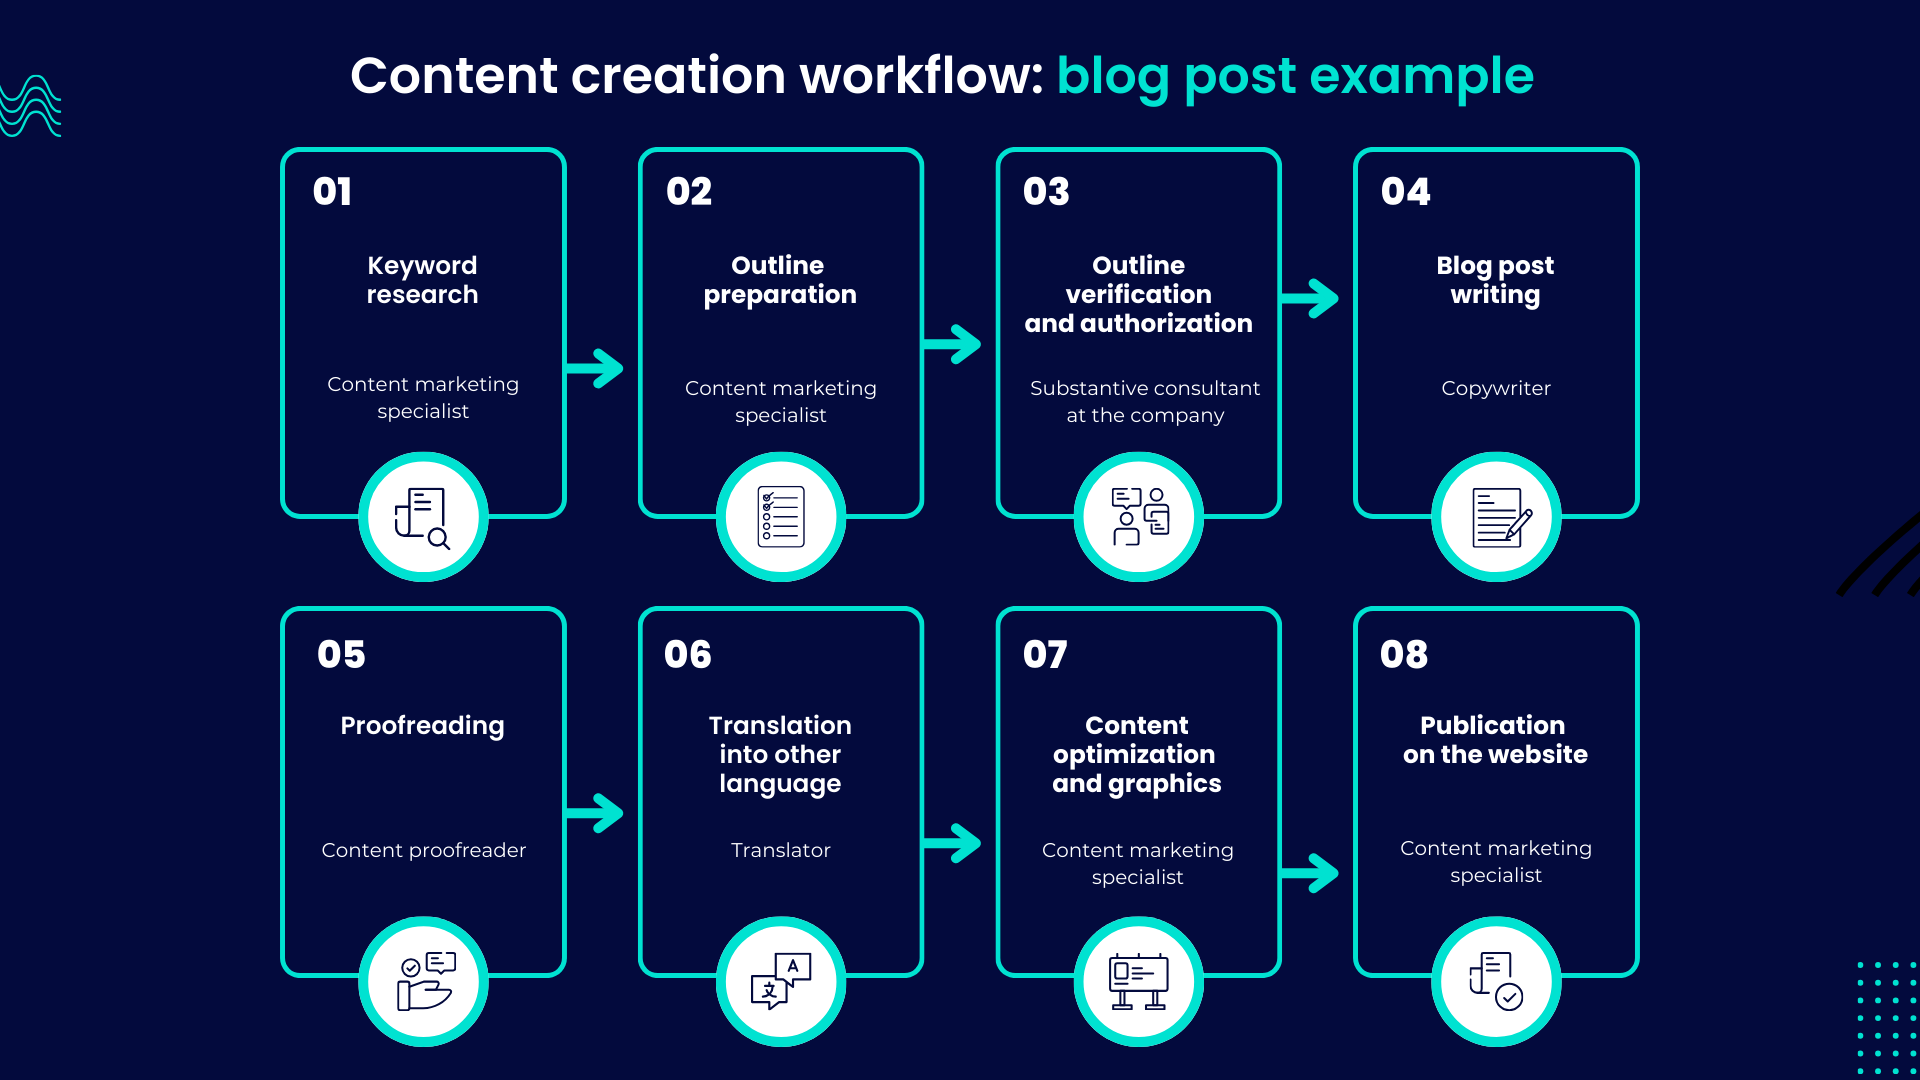 Content creation workflow includes different tasks and allows you to assign different specialists.